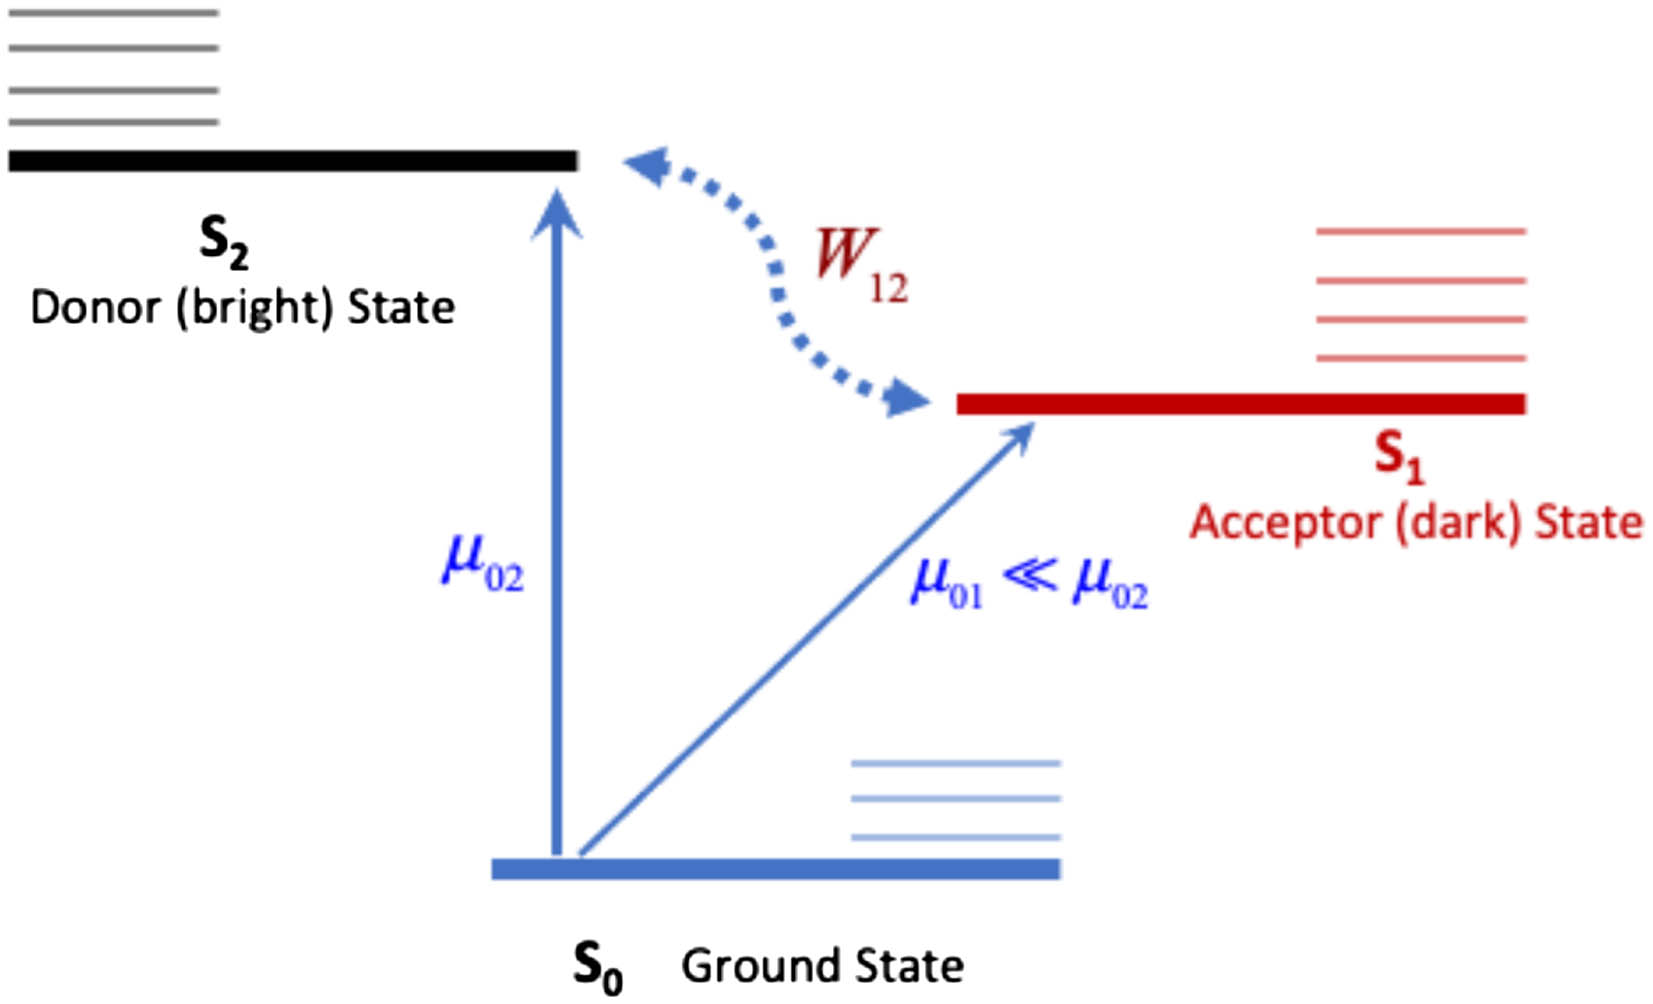 Schematic view of the three-state model used for pyrazine. The ground state S0 is indicated in thick solid blue line. The bright donor state S2 is a thick solid black line, and the dark acceptor state S2 is a thick solid red line. The thin horizontal lines are for the corresponding vibrational states. The interstate coupling W12 in the dotted blue line and the transition dipole moments µ01 and µ02 are also indicated.